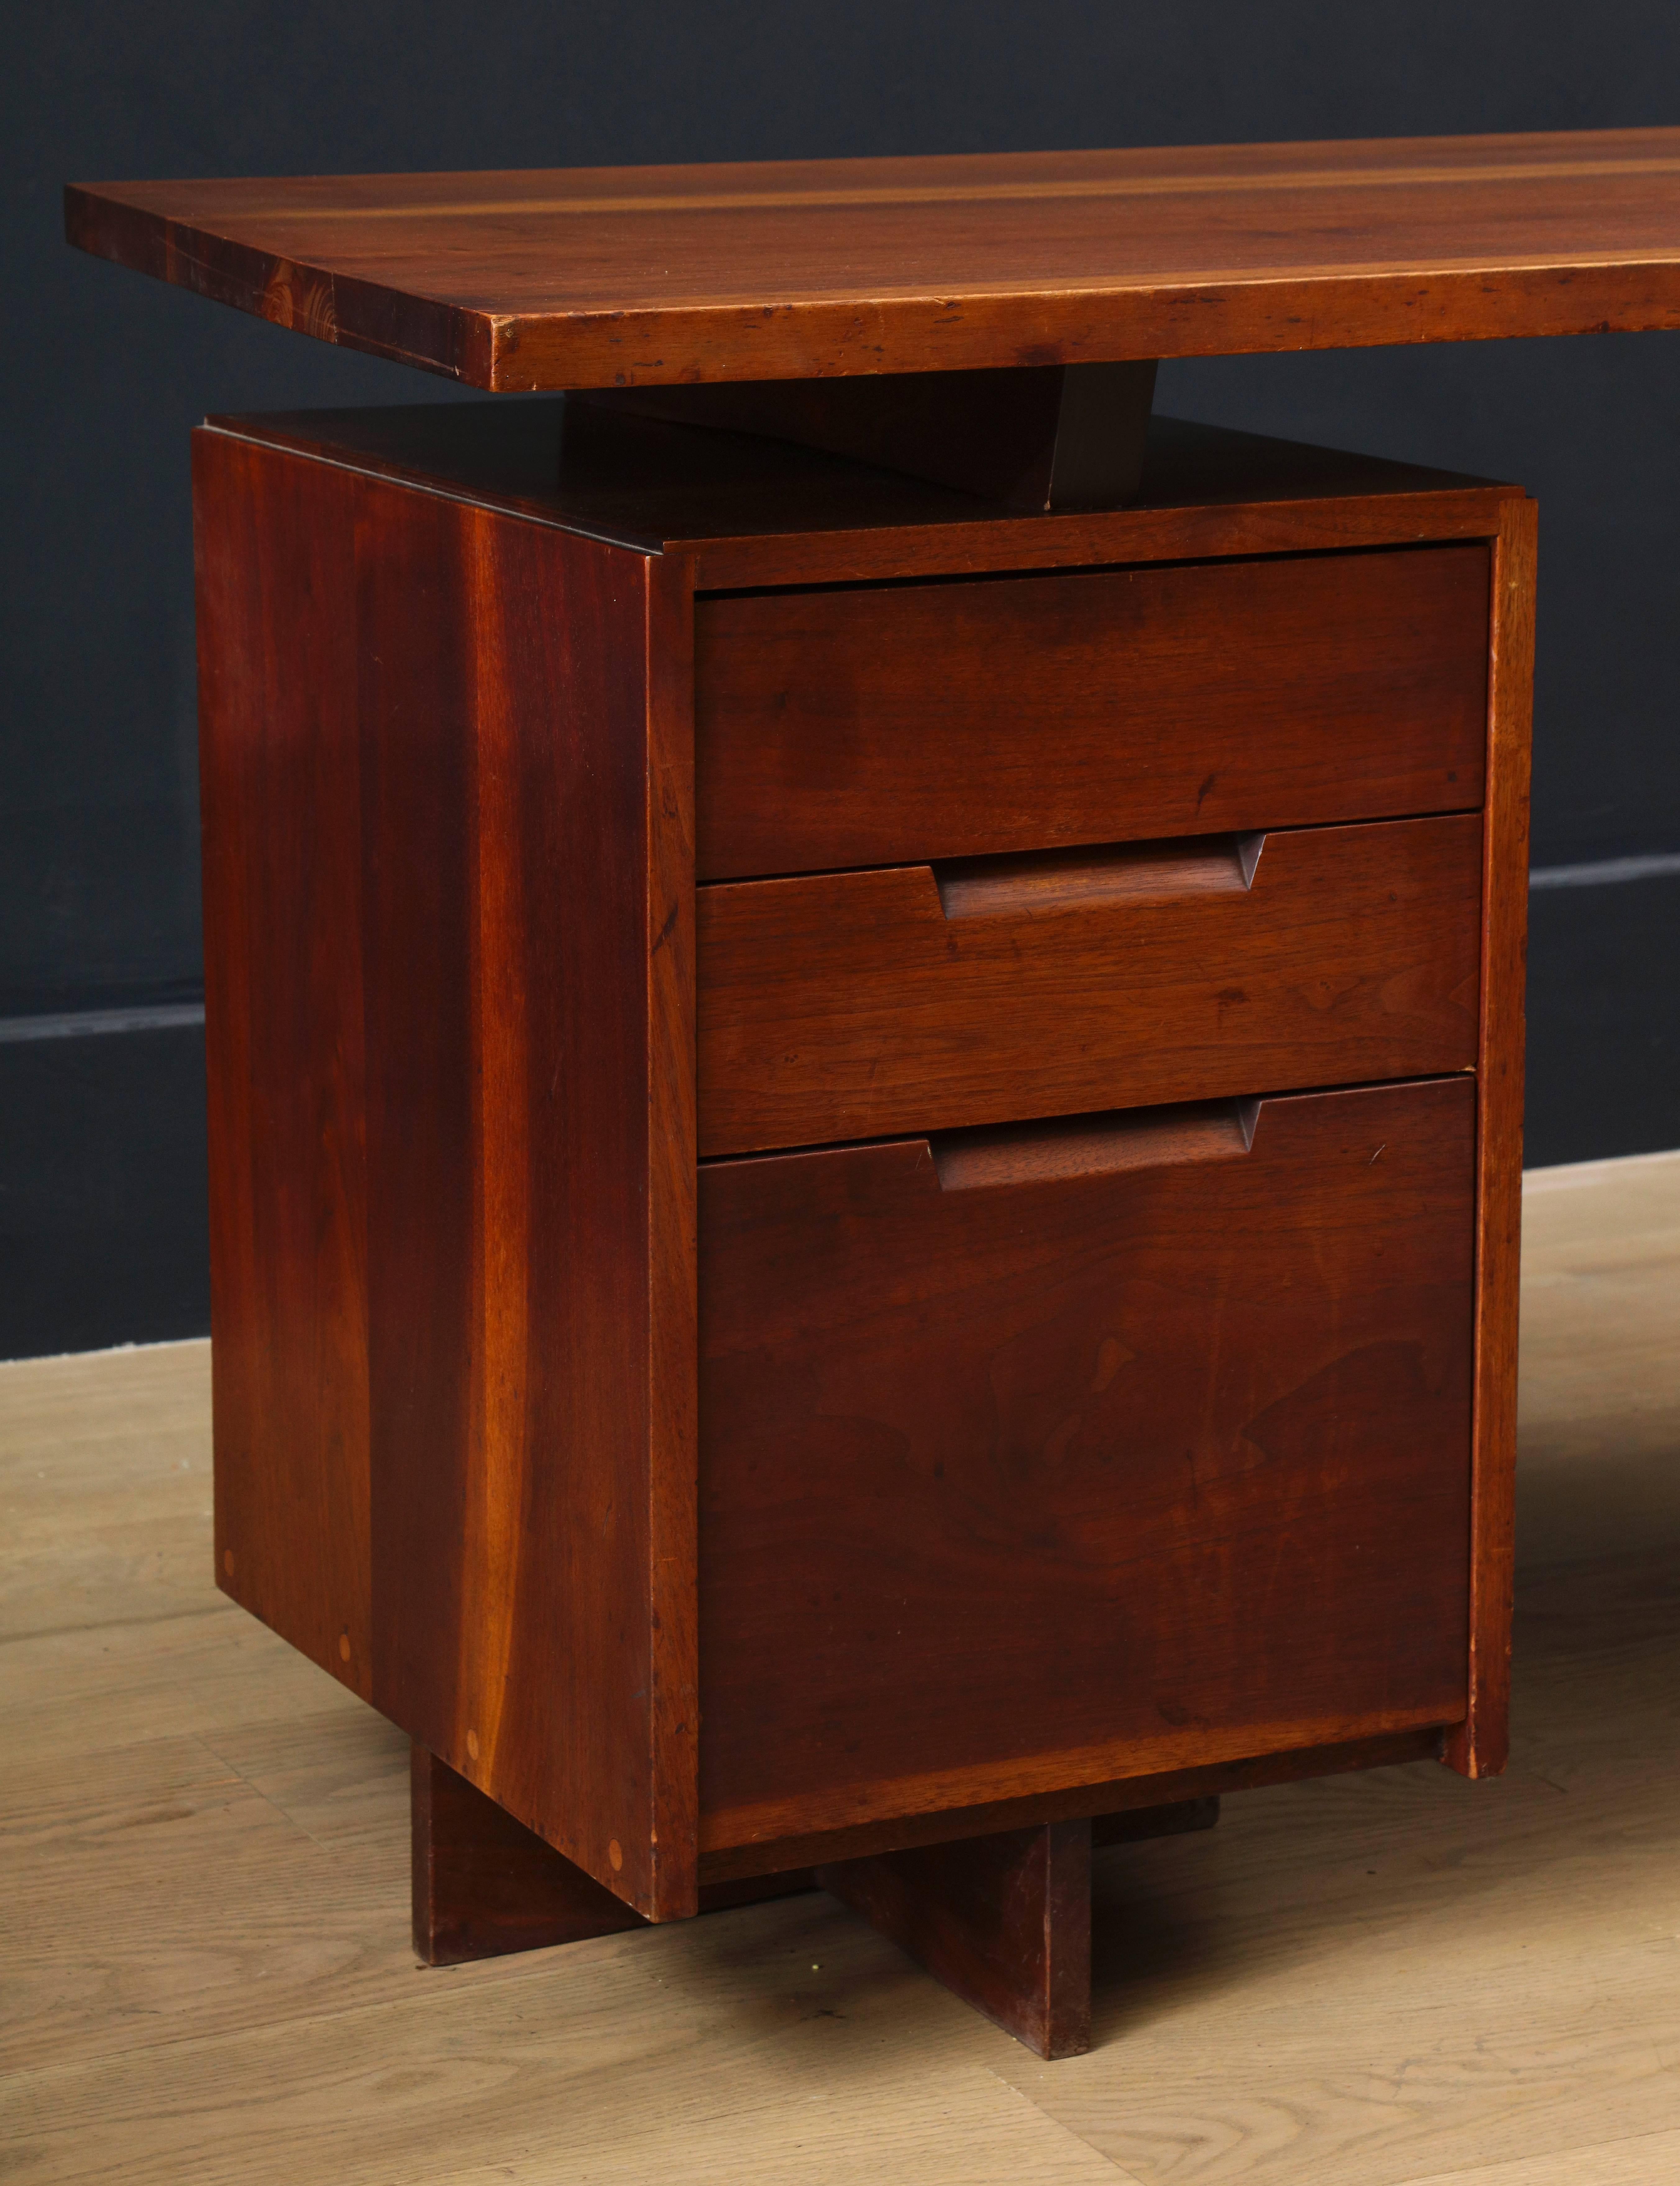 Mid-Century Modern Double Pedestal Desk by George Nakashima, 1964 For Sale